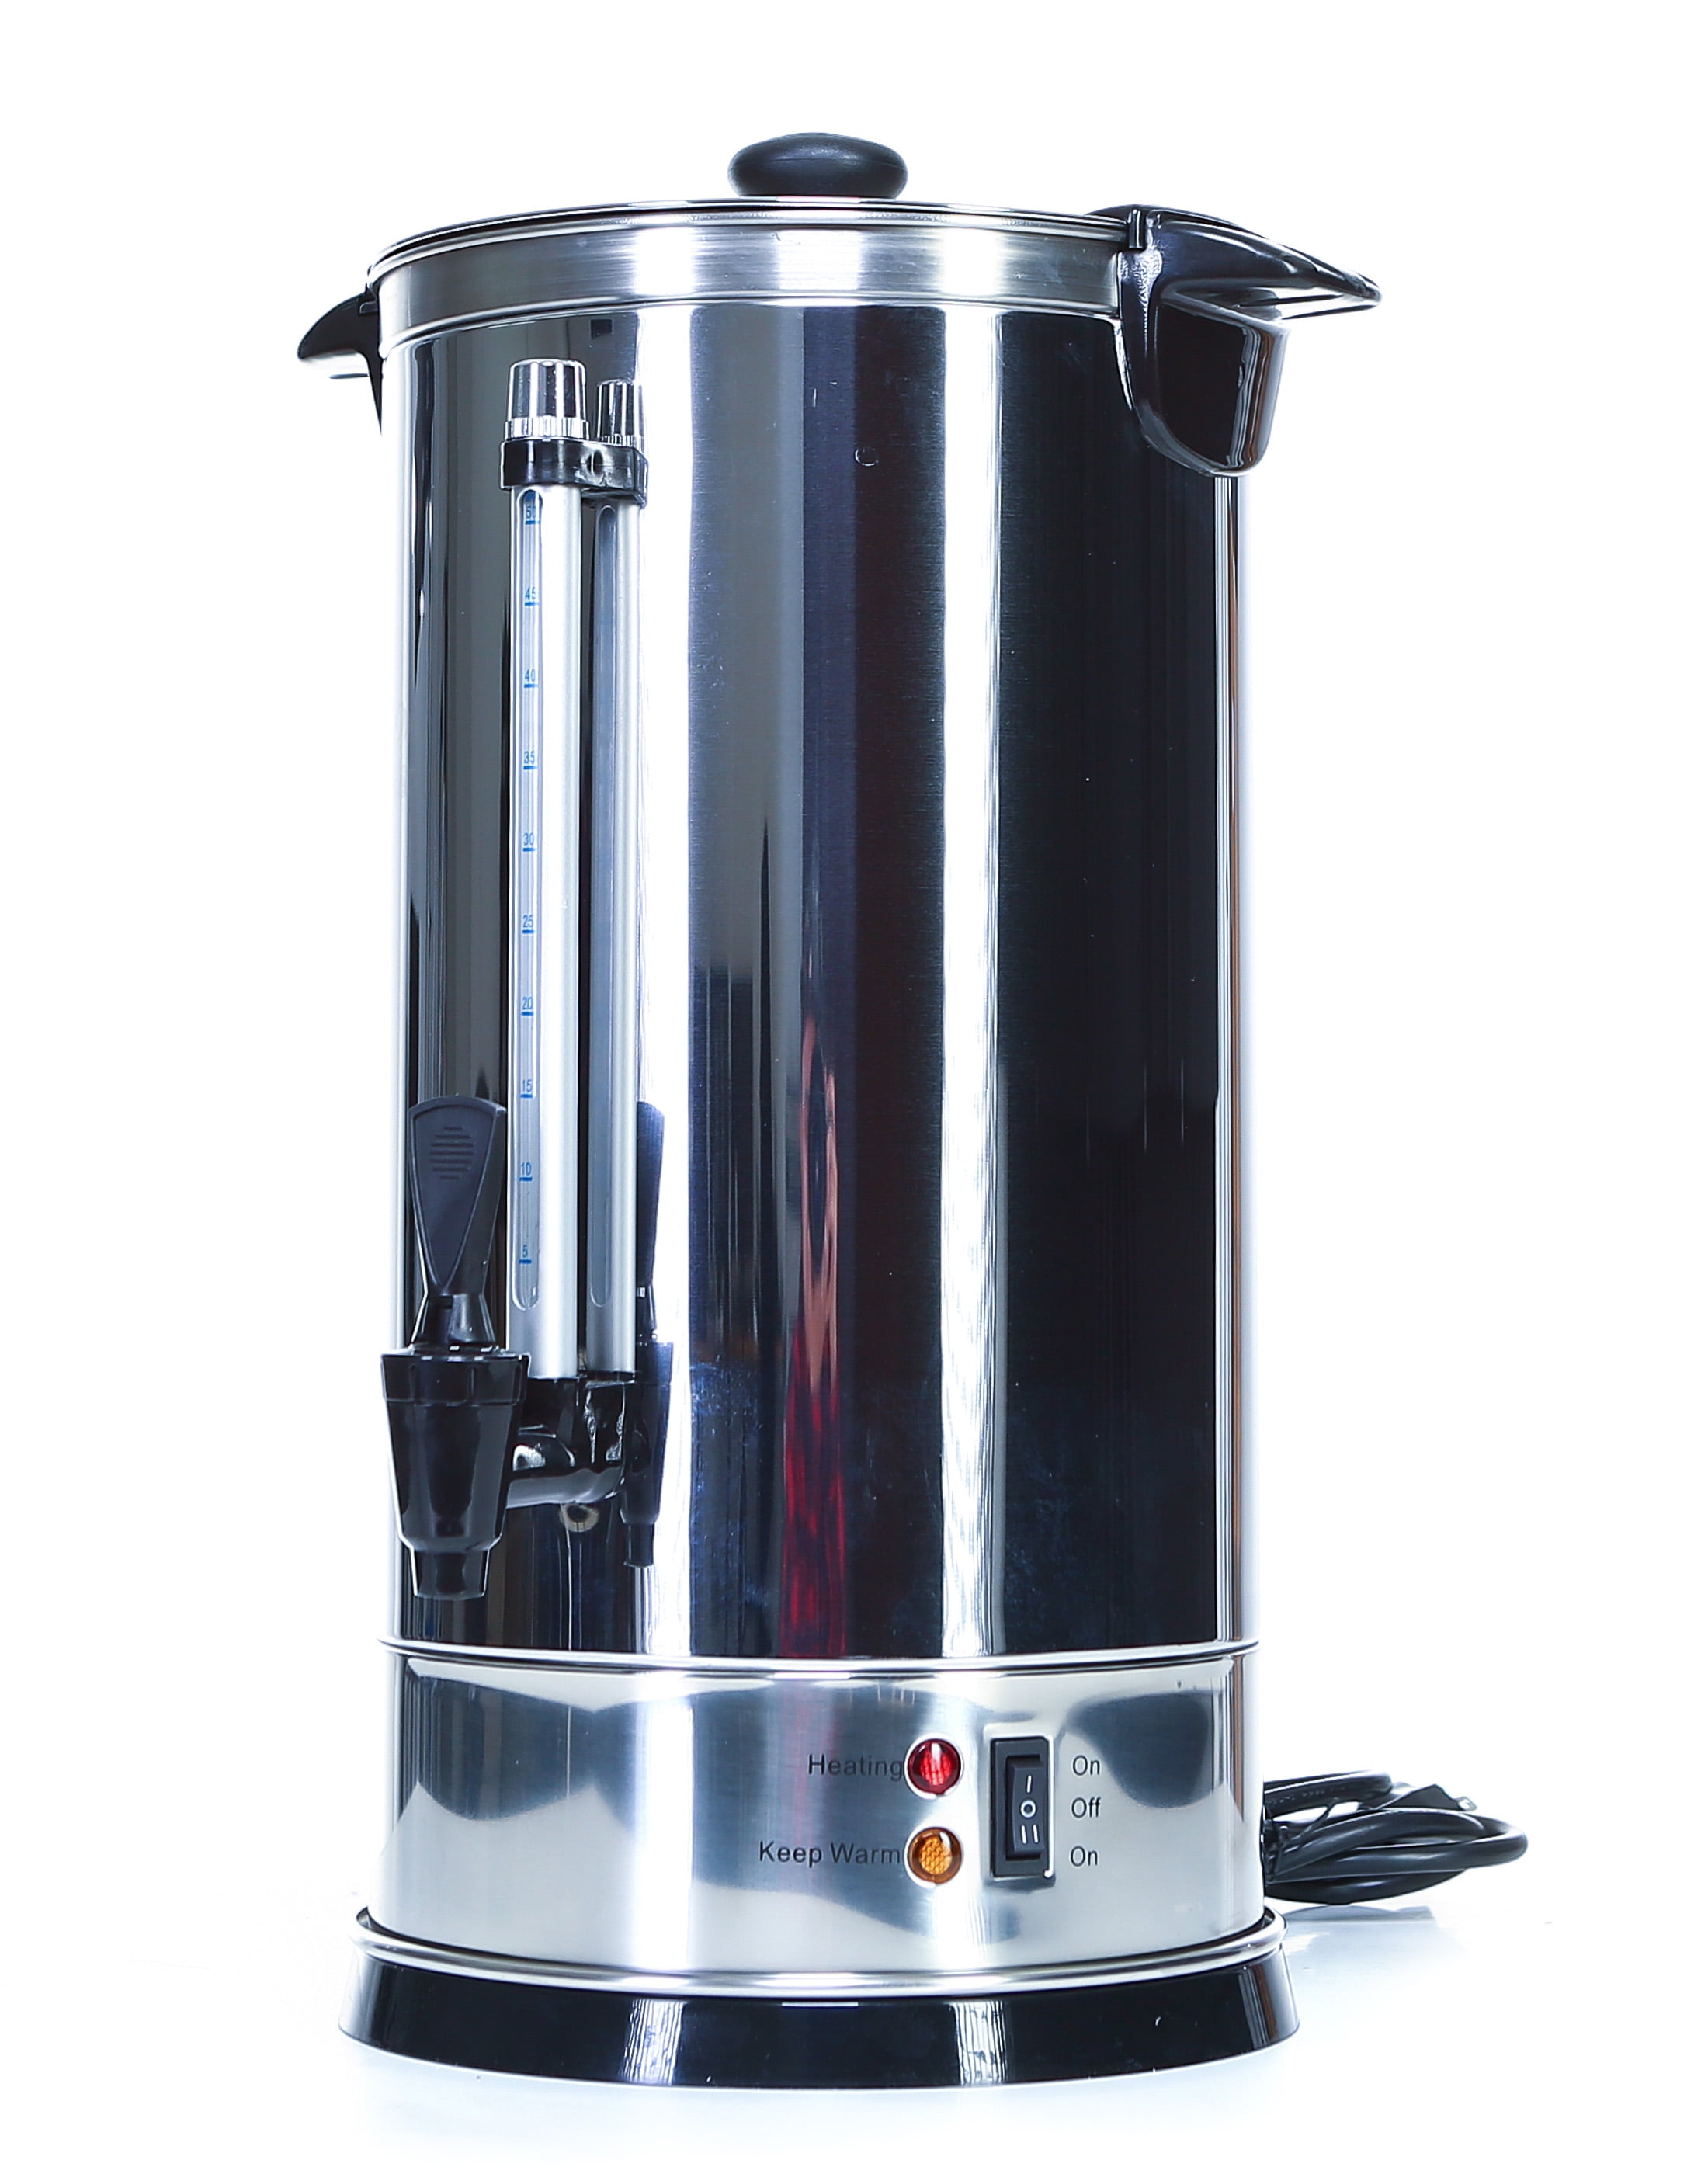 Auto Temperature Control Commercial & Home Urns Great for Catering Buffets Parties Weddings Holiday Jewish Dinners Shabbat Automatic Coffee Urn 30 Cups Stainless Steel Hot Water Boiler & Warmer